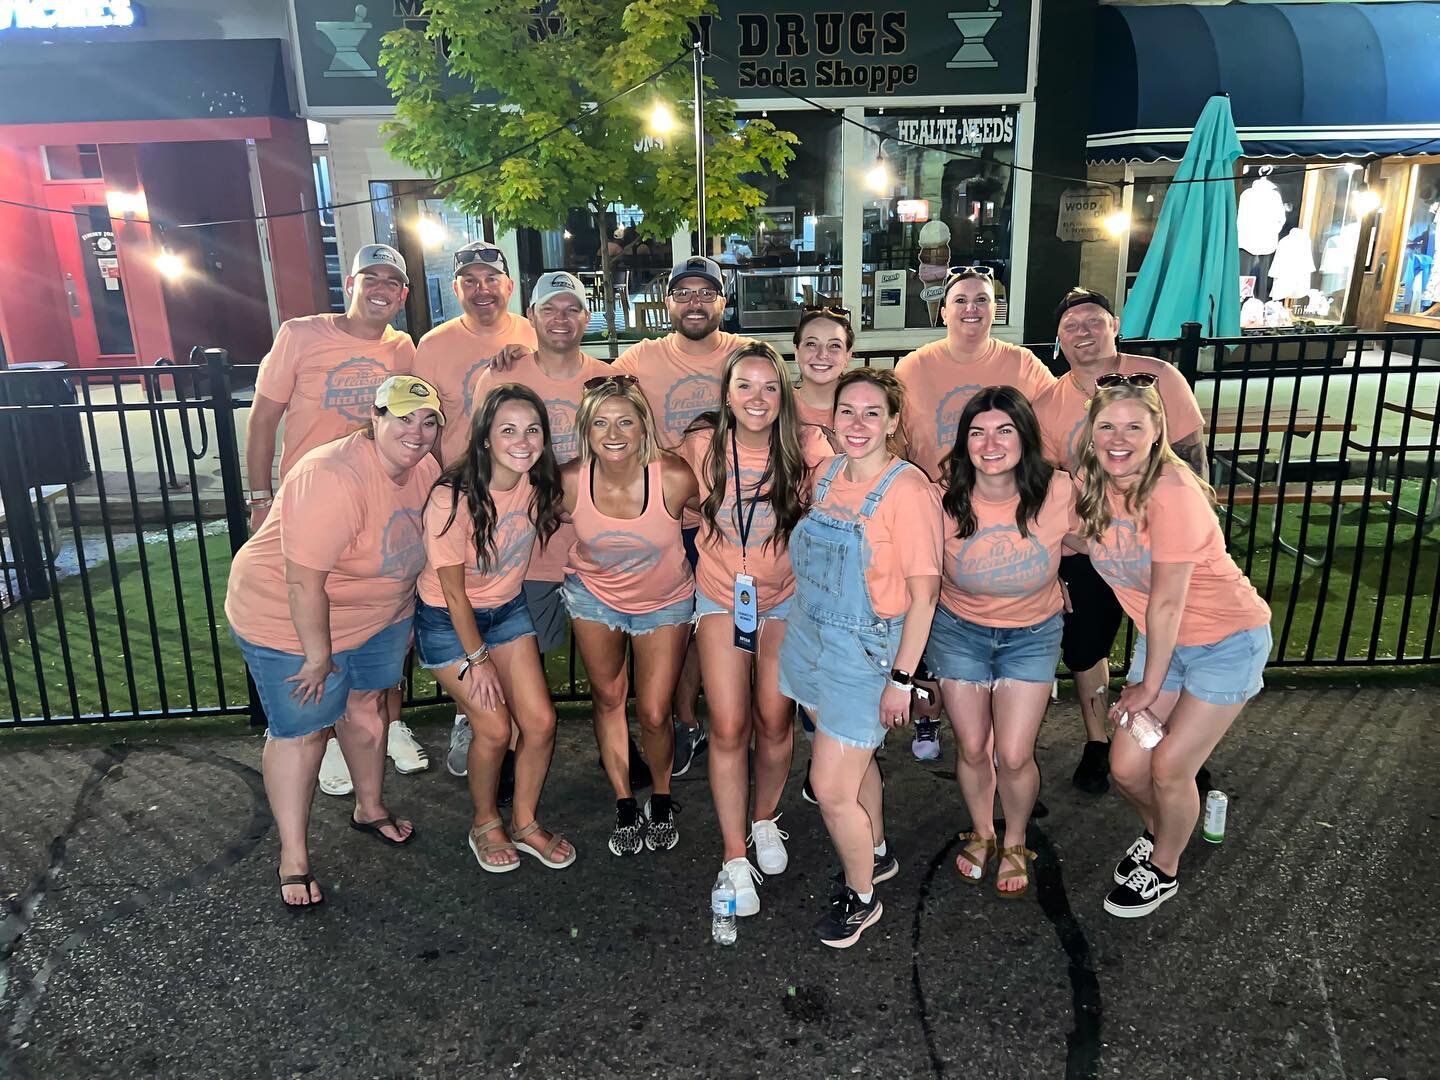 And that's a wrap!🎬🍻 Thank you to everyone who attended or volunteered yesterday! Let's show some love to the Mt. Pleasant Craft Beer Festival committee who work hard to put on this fun community event. See you next year!